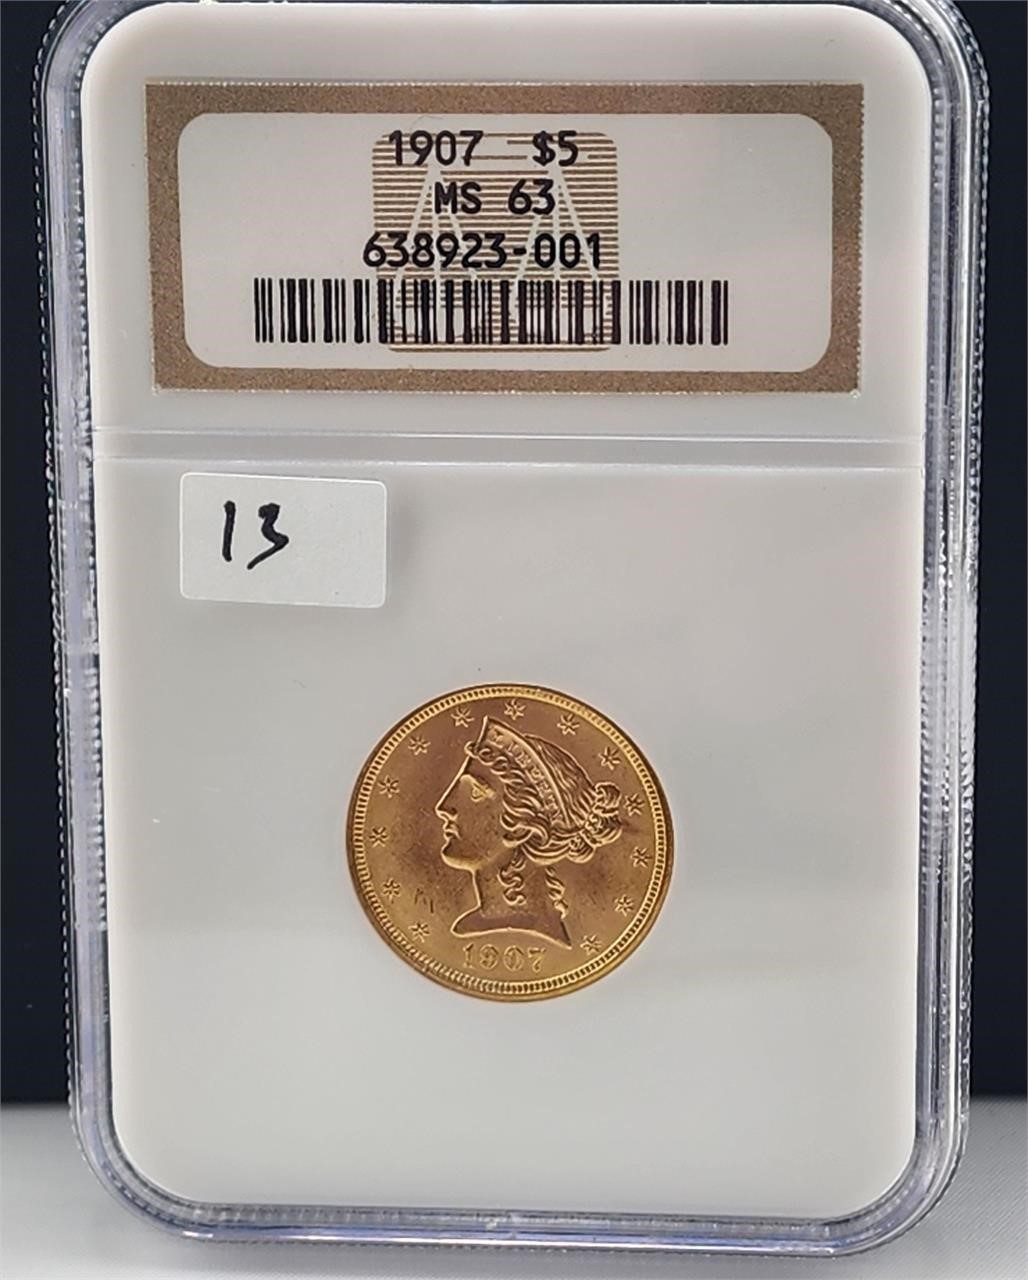 1907 $5 Gold NGC MS63